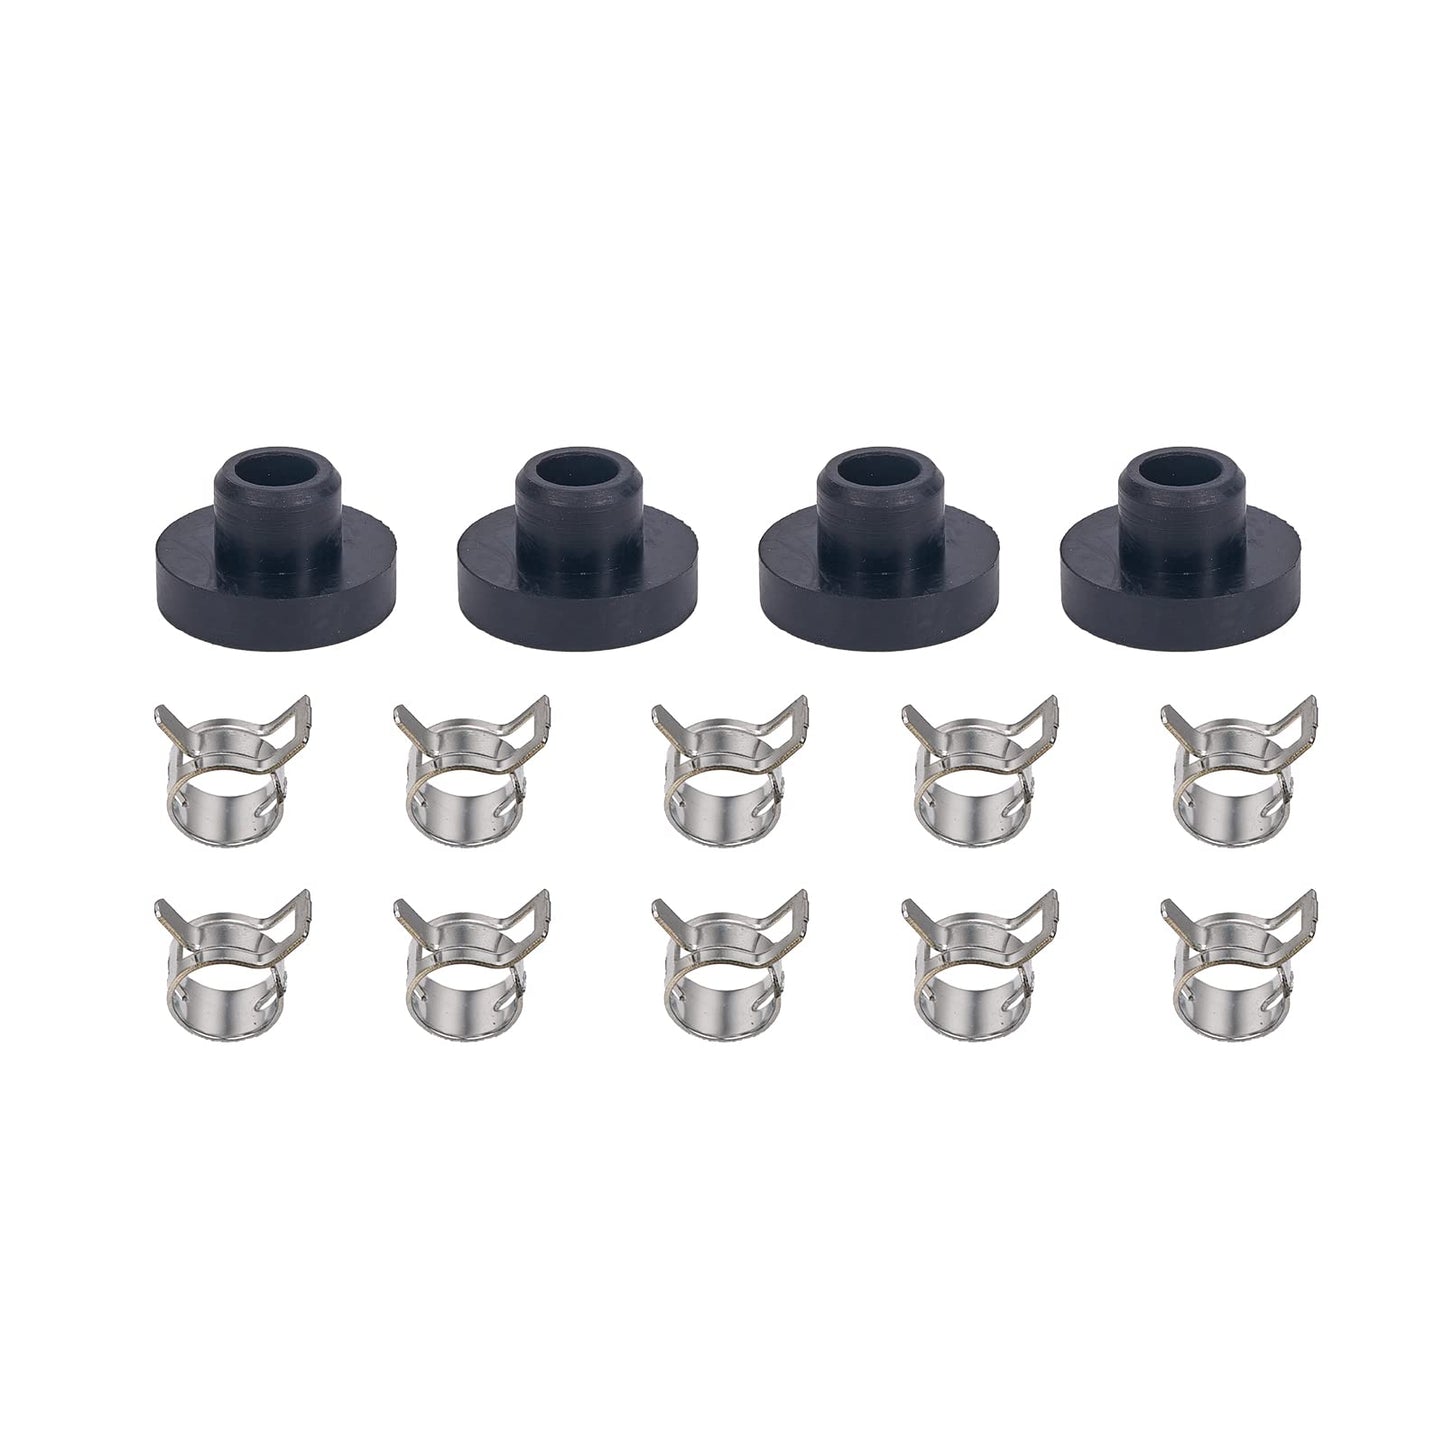 Mikatesi 2Pack Two-Way Cut-Off Fuel Valves Kit Replaces For Scag 2-Way 1/4" Barbs Steel Fuel Oil Gas Petcock in Line Valve 482212, E633347, 1-633347, Husqvarana 539102679 with Hose Clamps